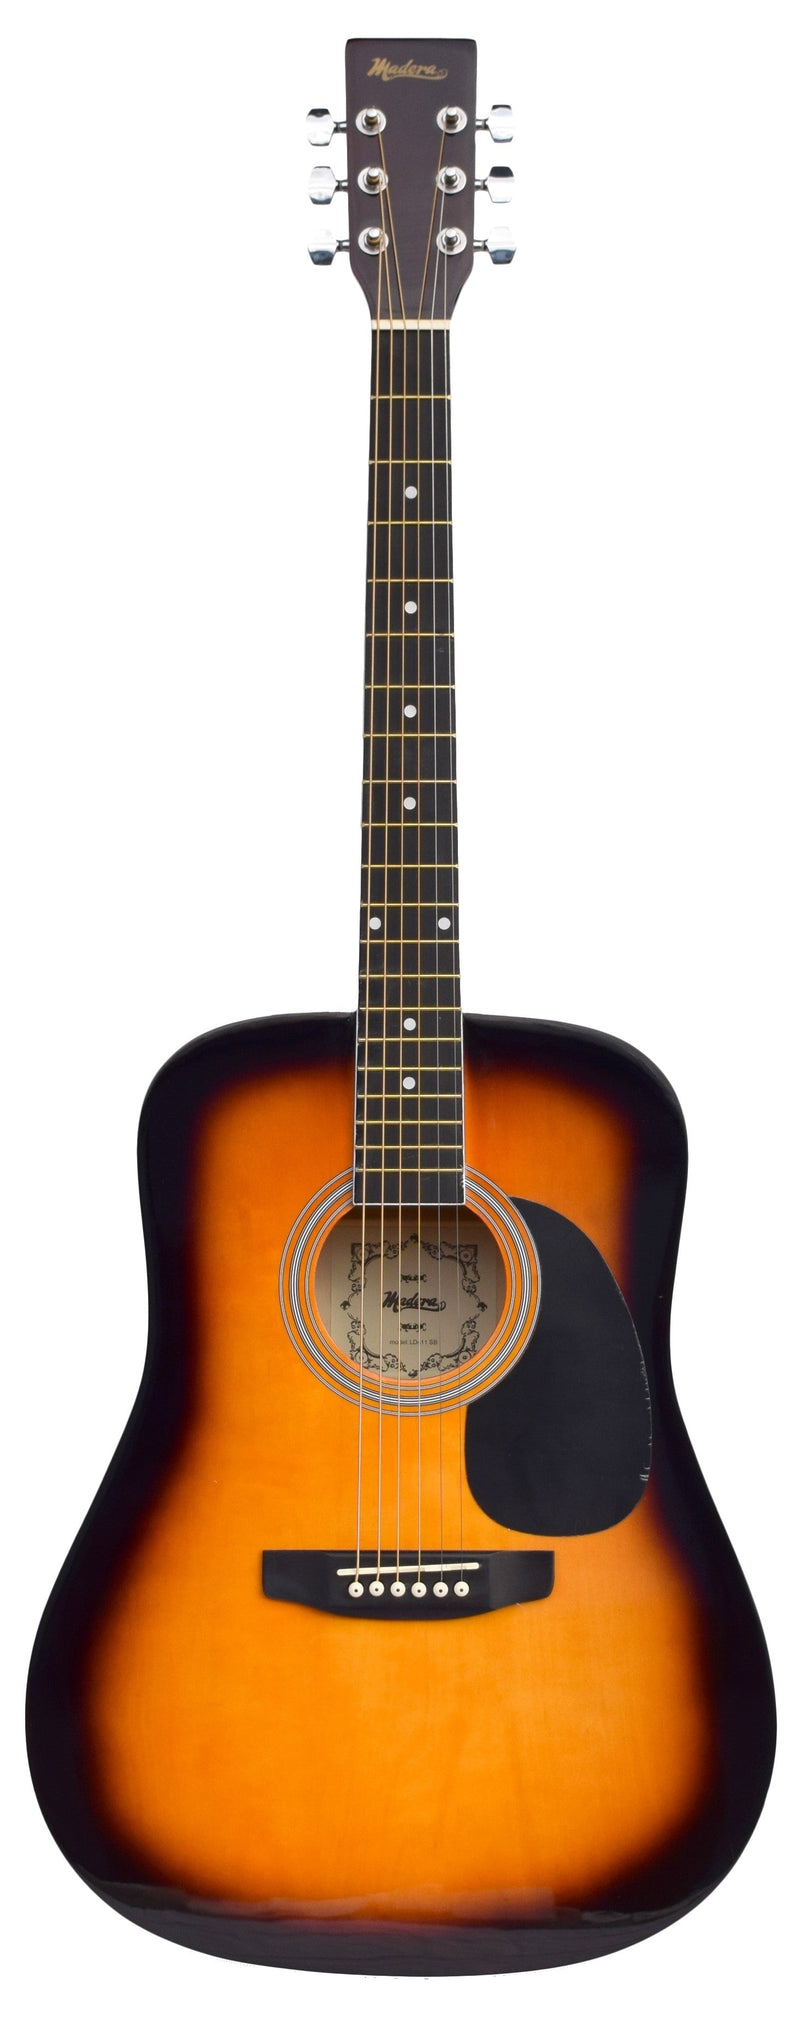 Madera LD411-LH Acoustic Full Size Left Handed Guitar Sunburst Madera Instrument for sale canada